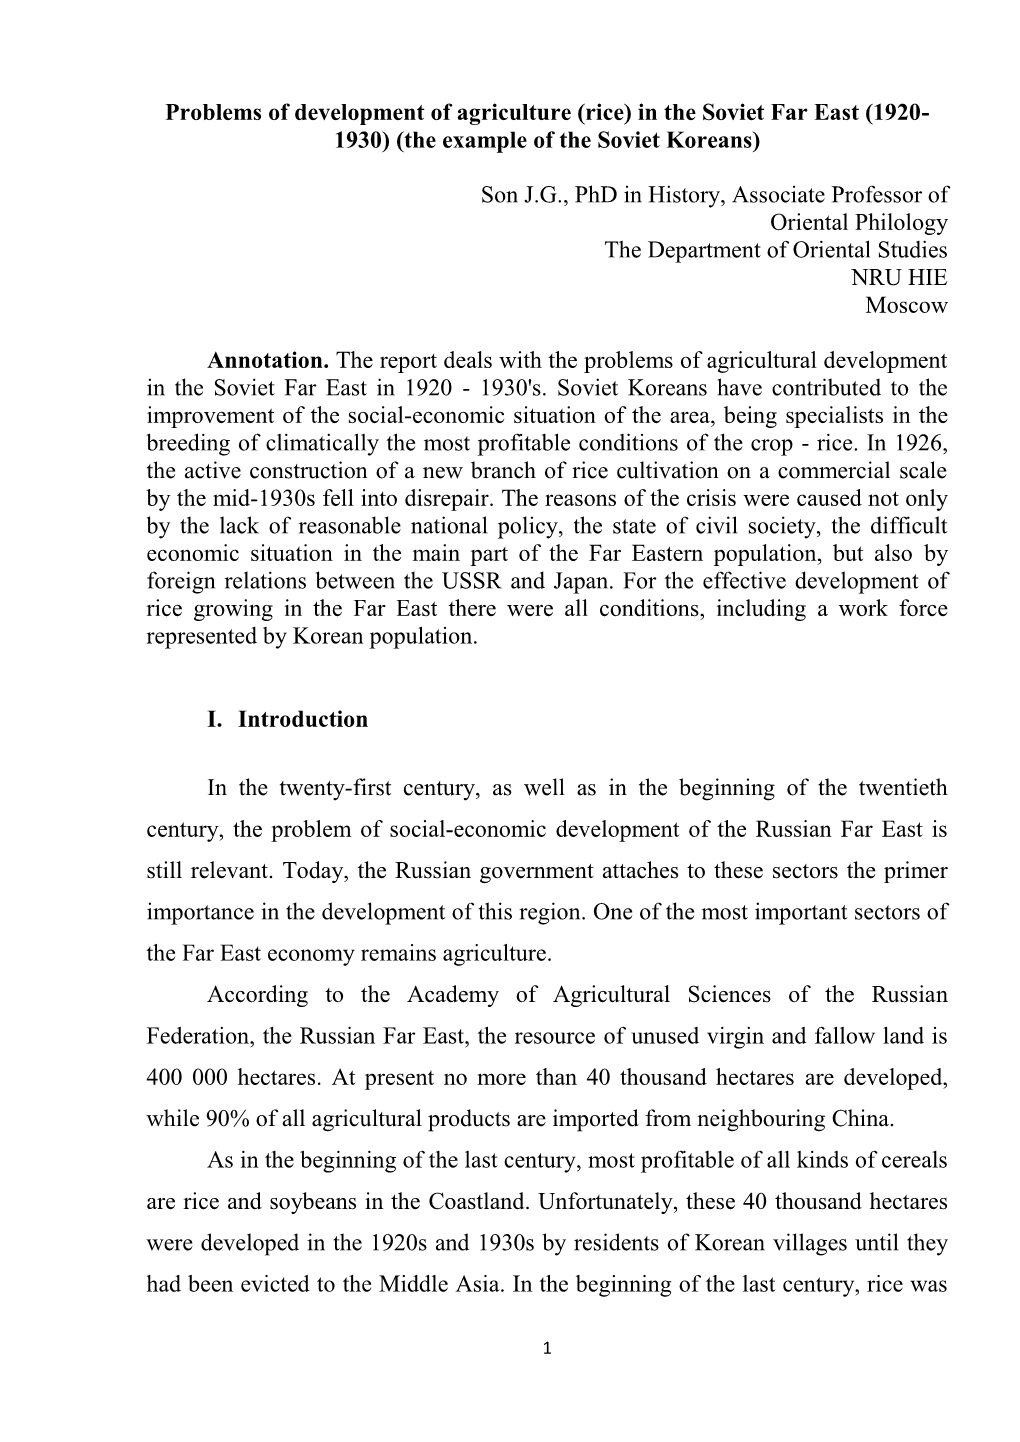 Problems of Development of Agriculture (Rice) in the Soviet Far East (1920- 1930) (The Example of the Soviet Koreans) Son J.G